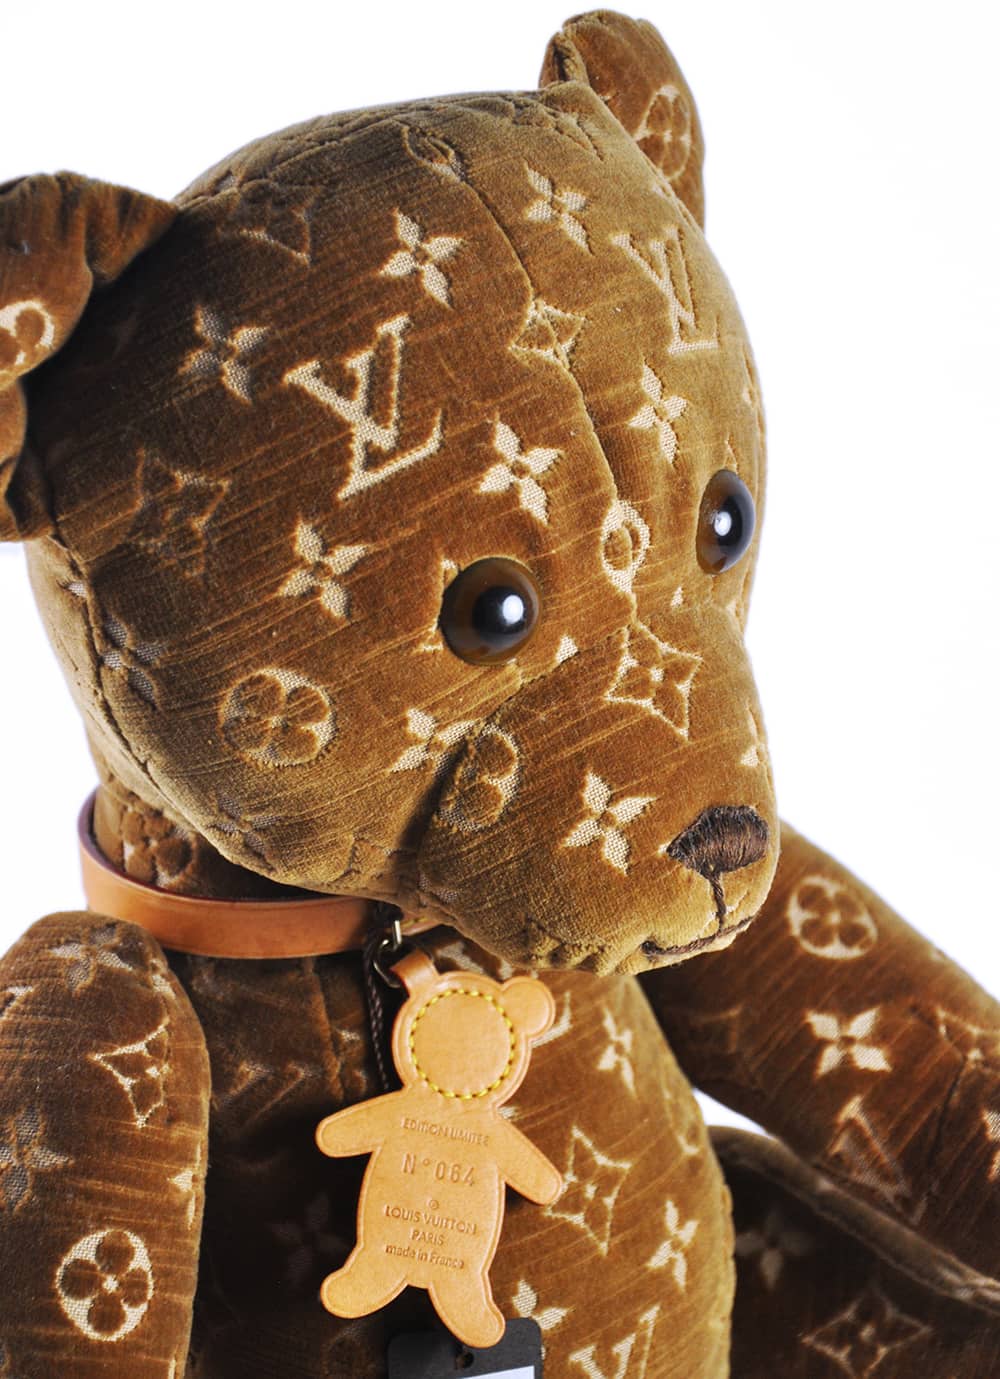 Louis Vuitton's limited edition Teddy Bear retails for $9000 at